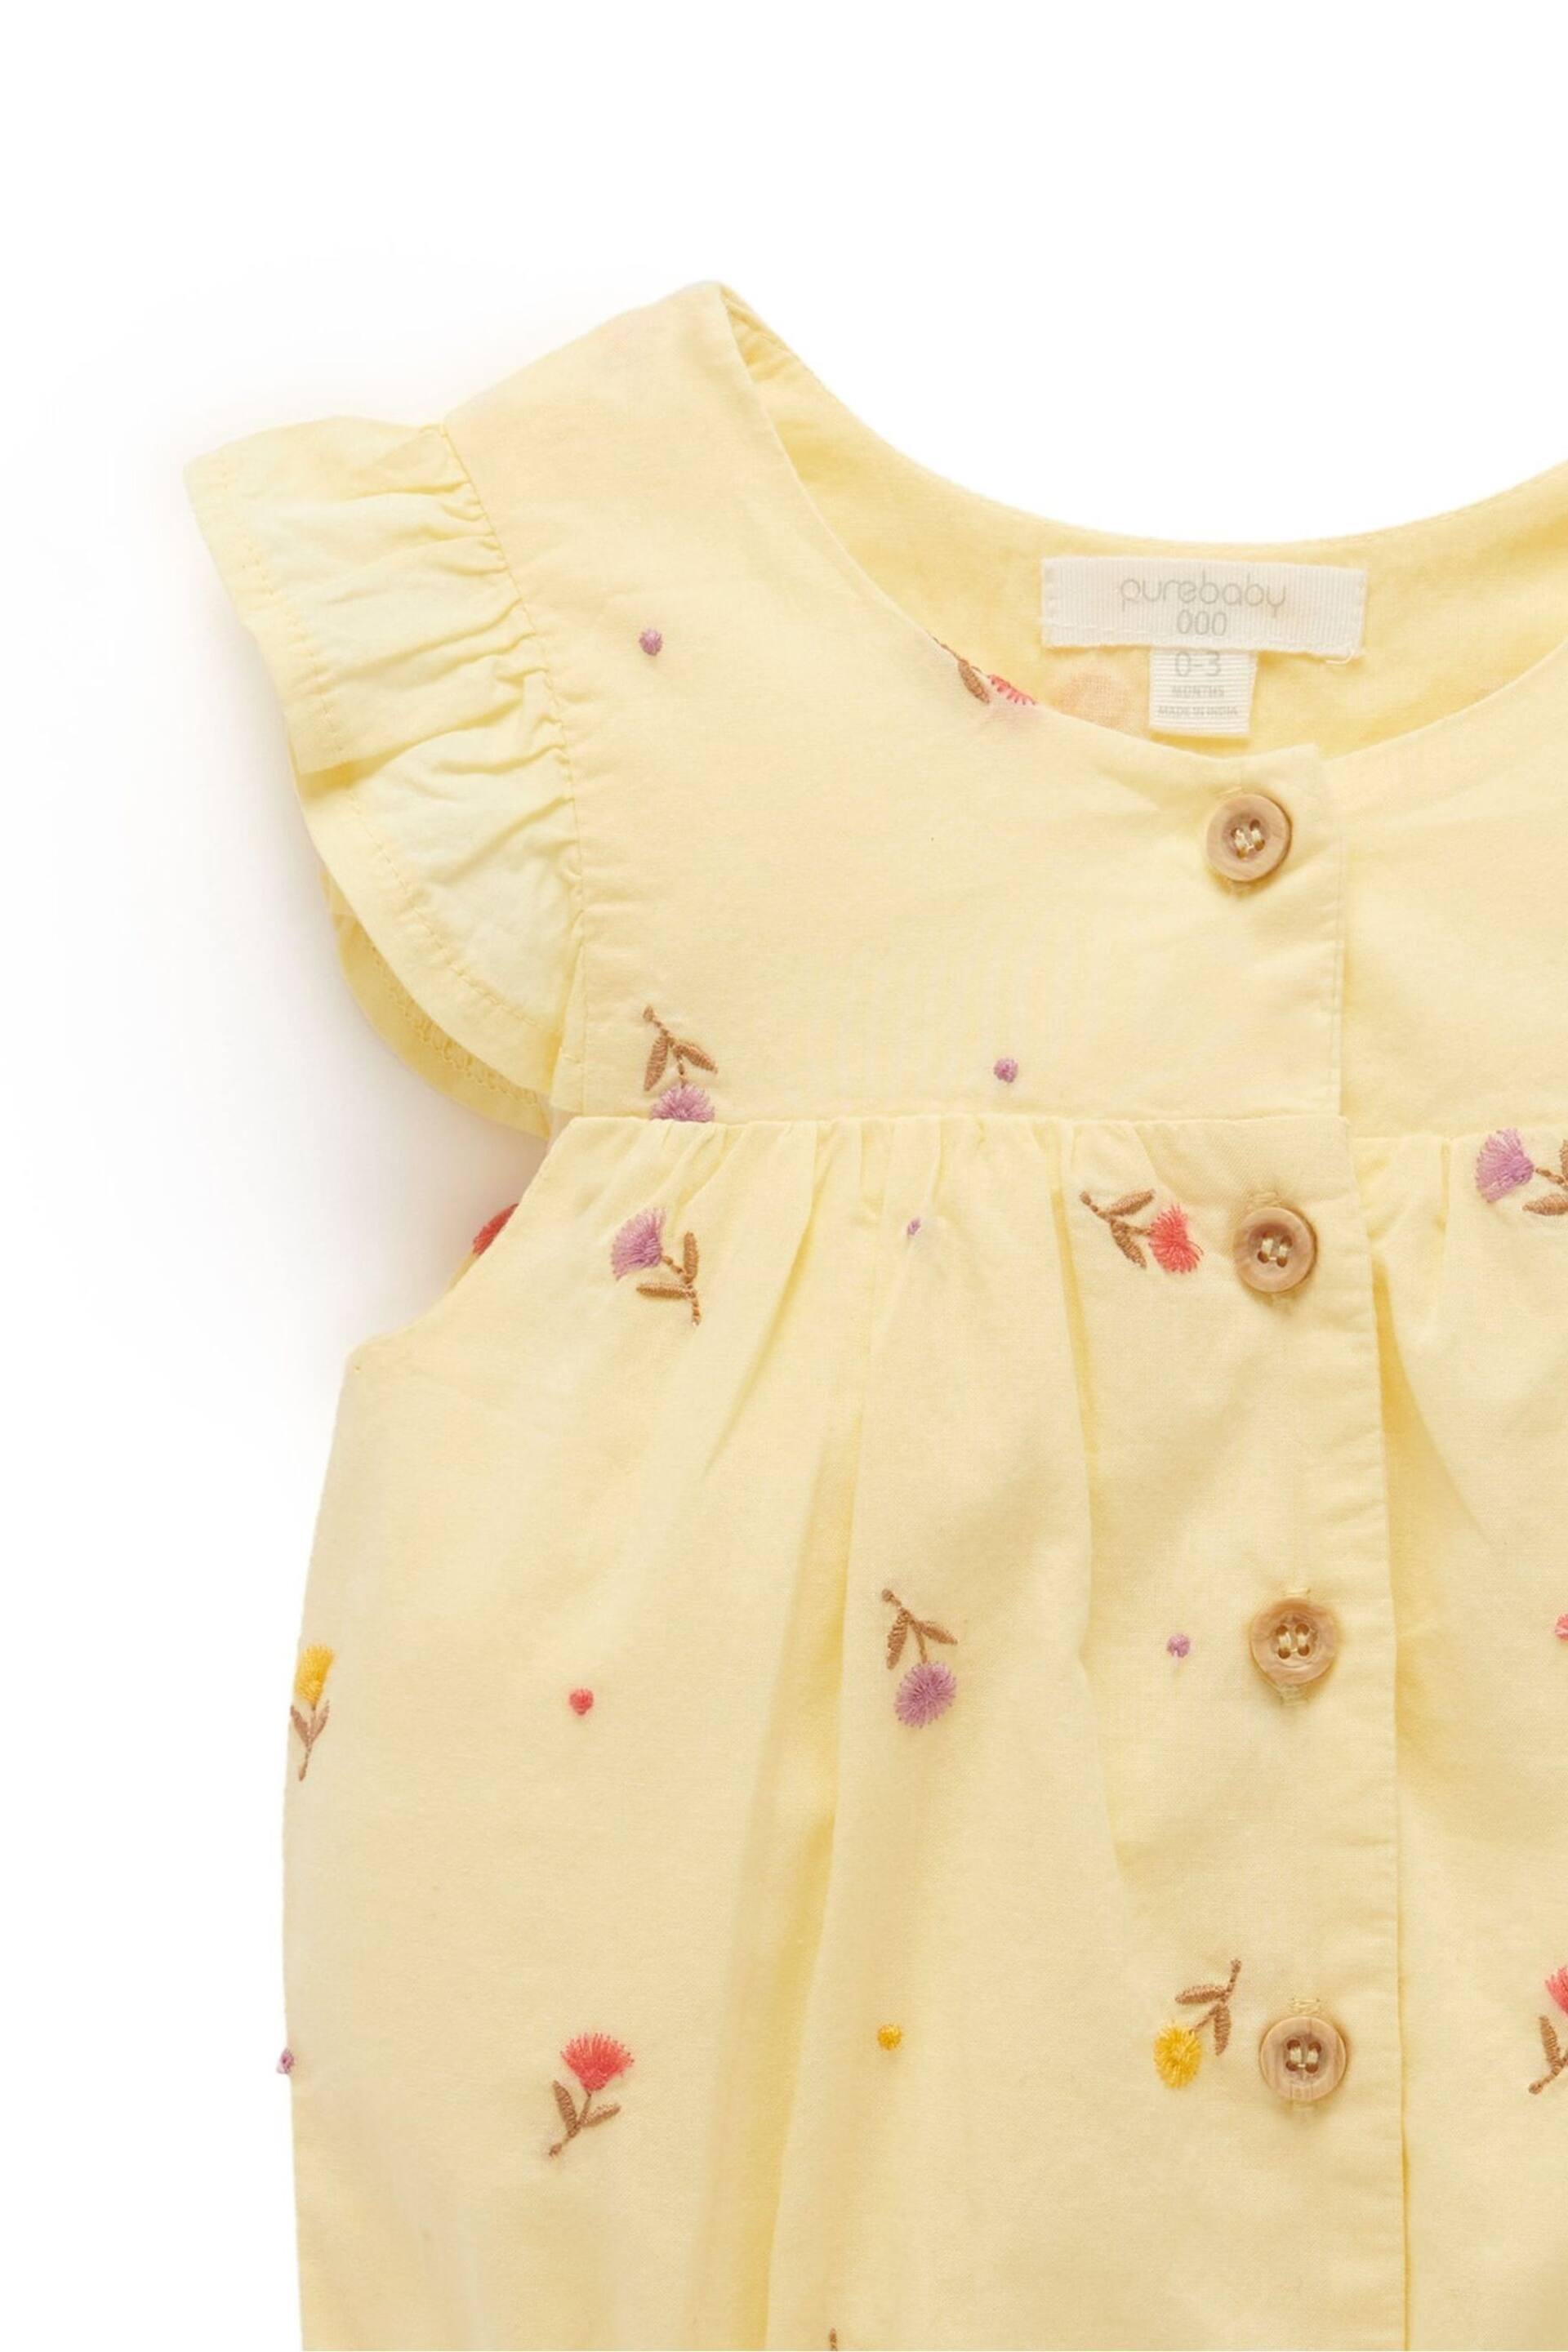 Purebaby Yellow Embroidered Romper - Image 3 of 4